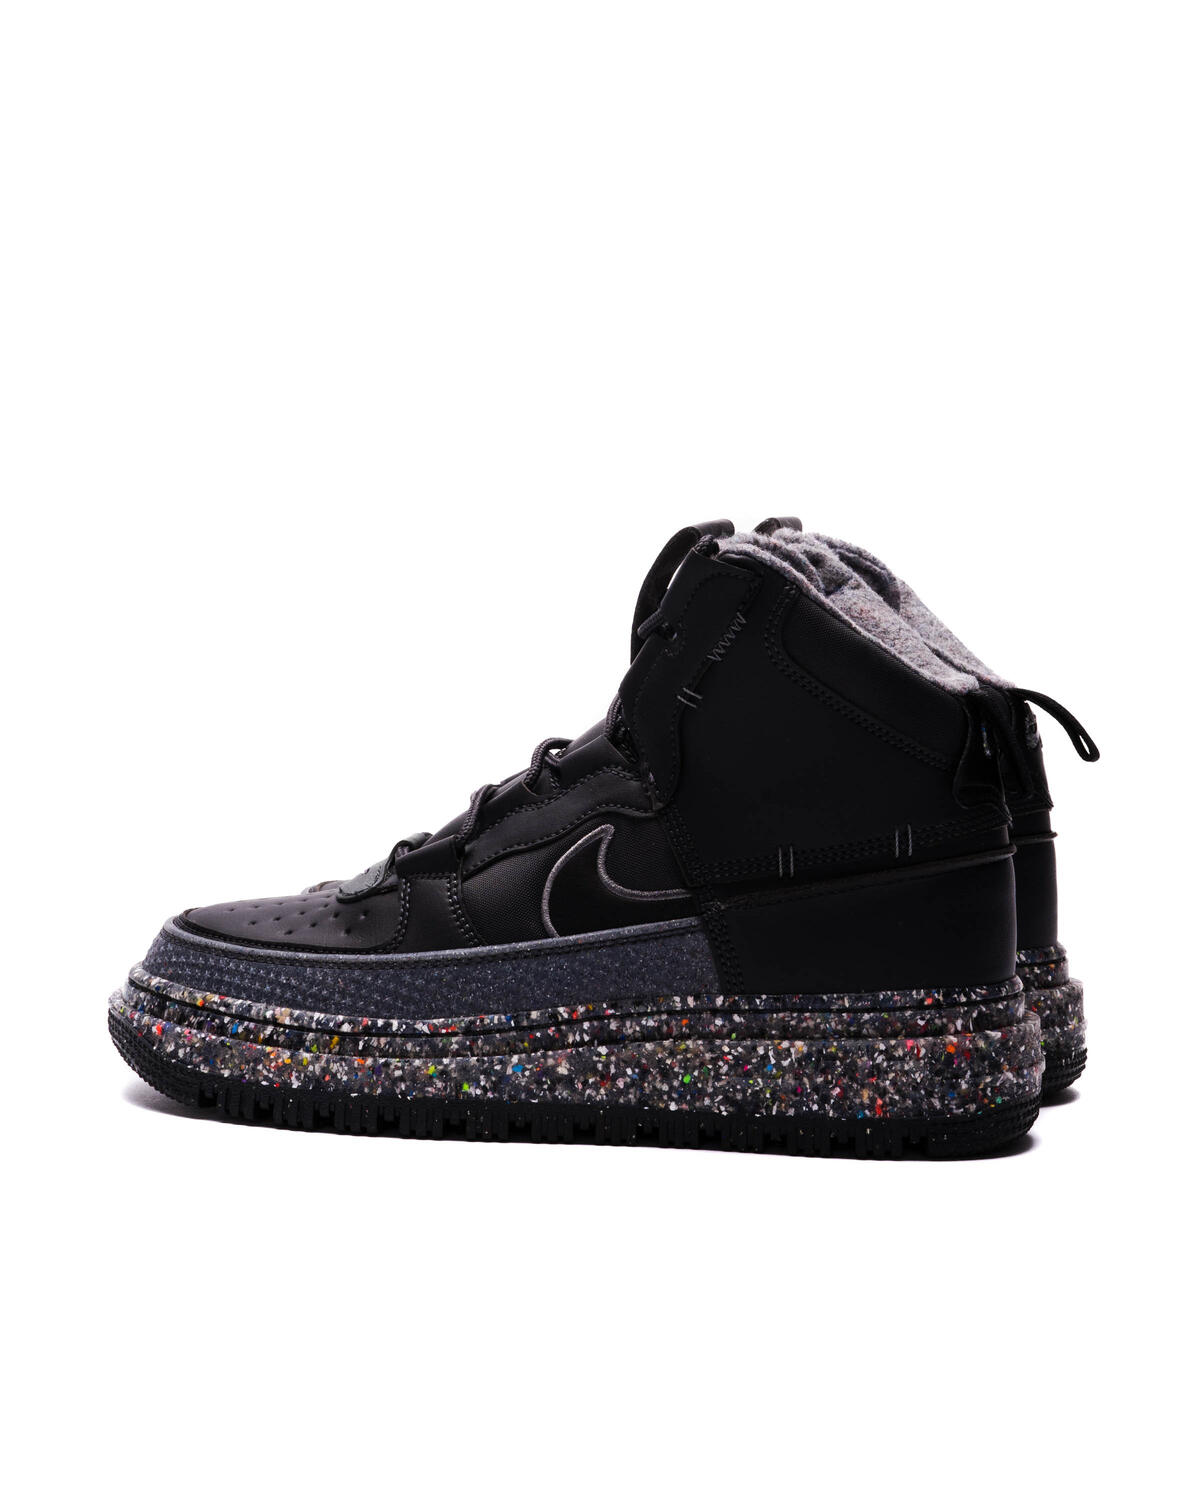 DD0747 | 001 | EllisonbronzeShops STORE nike sneakers with white on front of foot back | Nike FORCE 1 BOOT NN